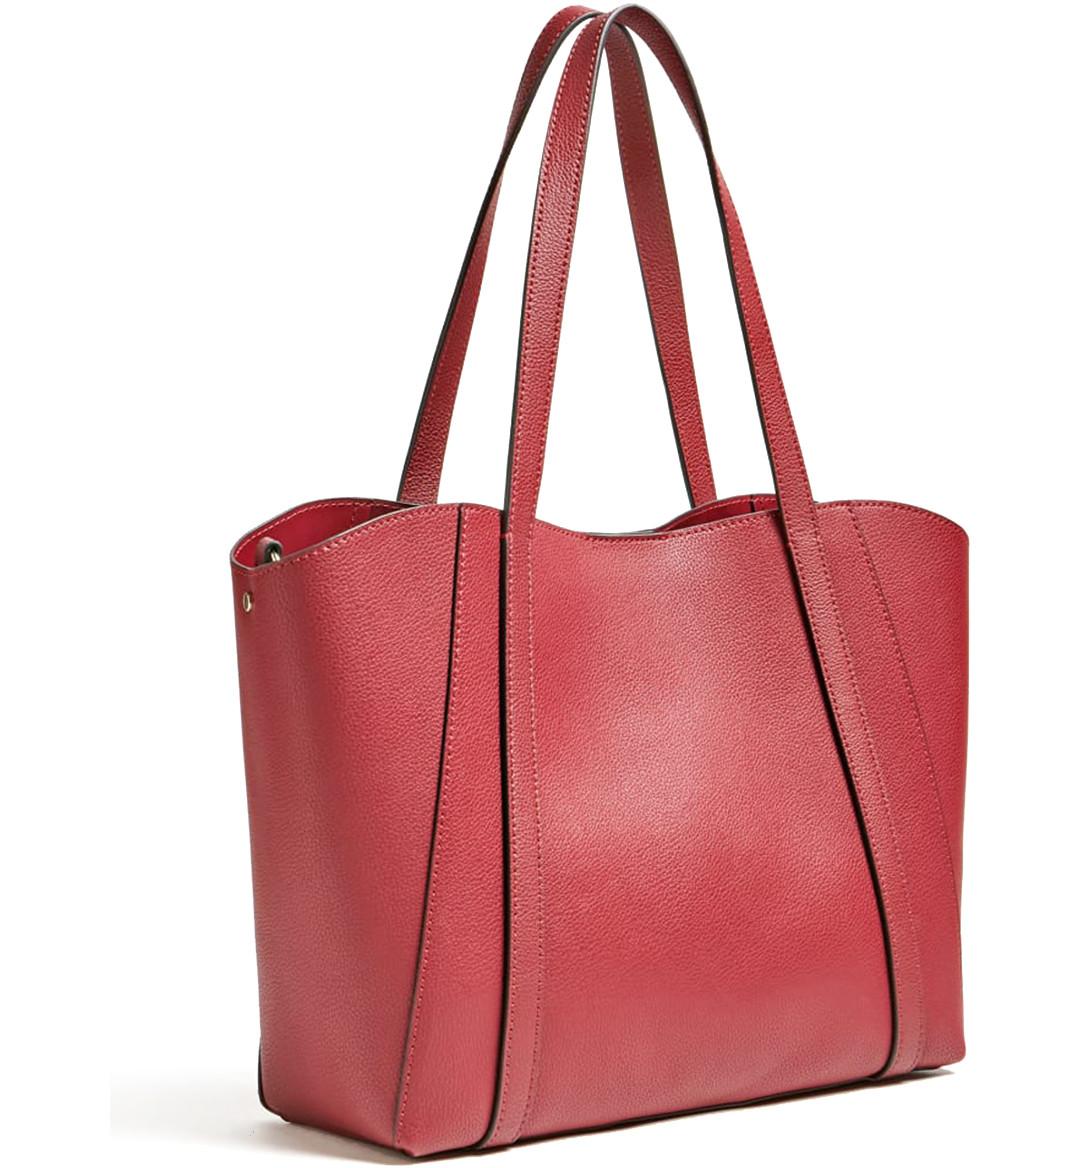 Guess Women's Red Backpack at FORZIERI